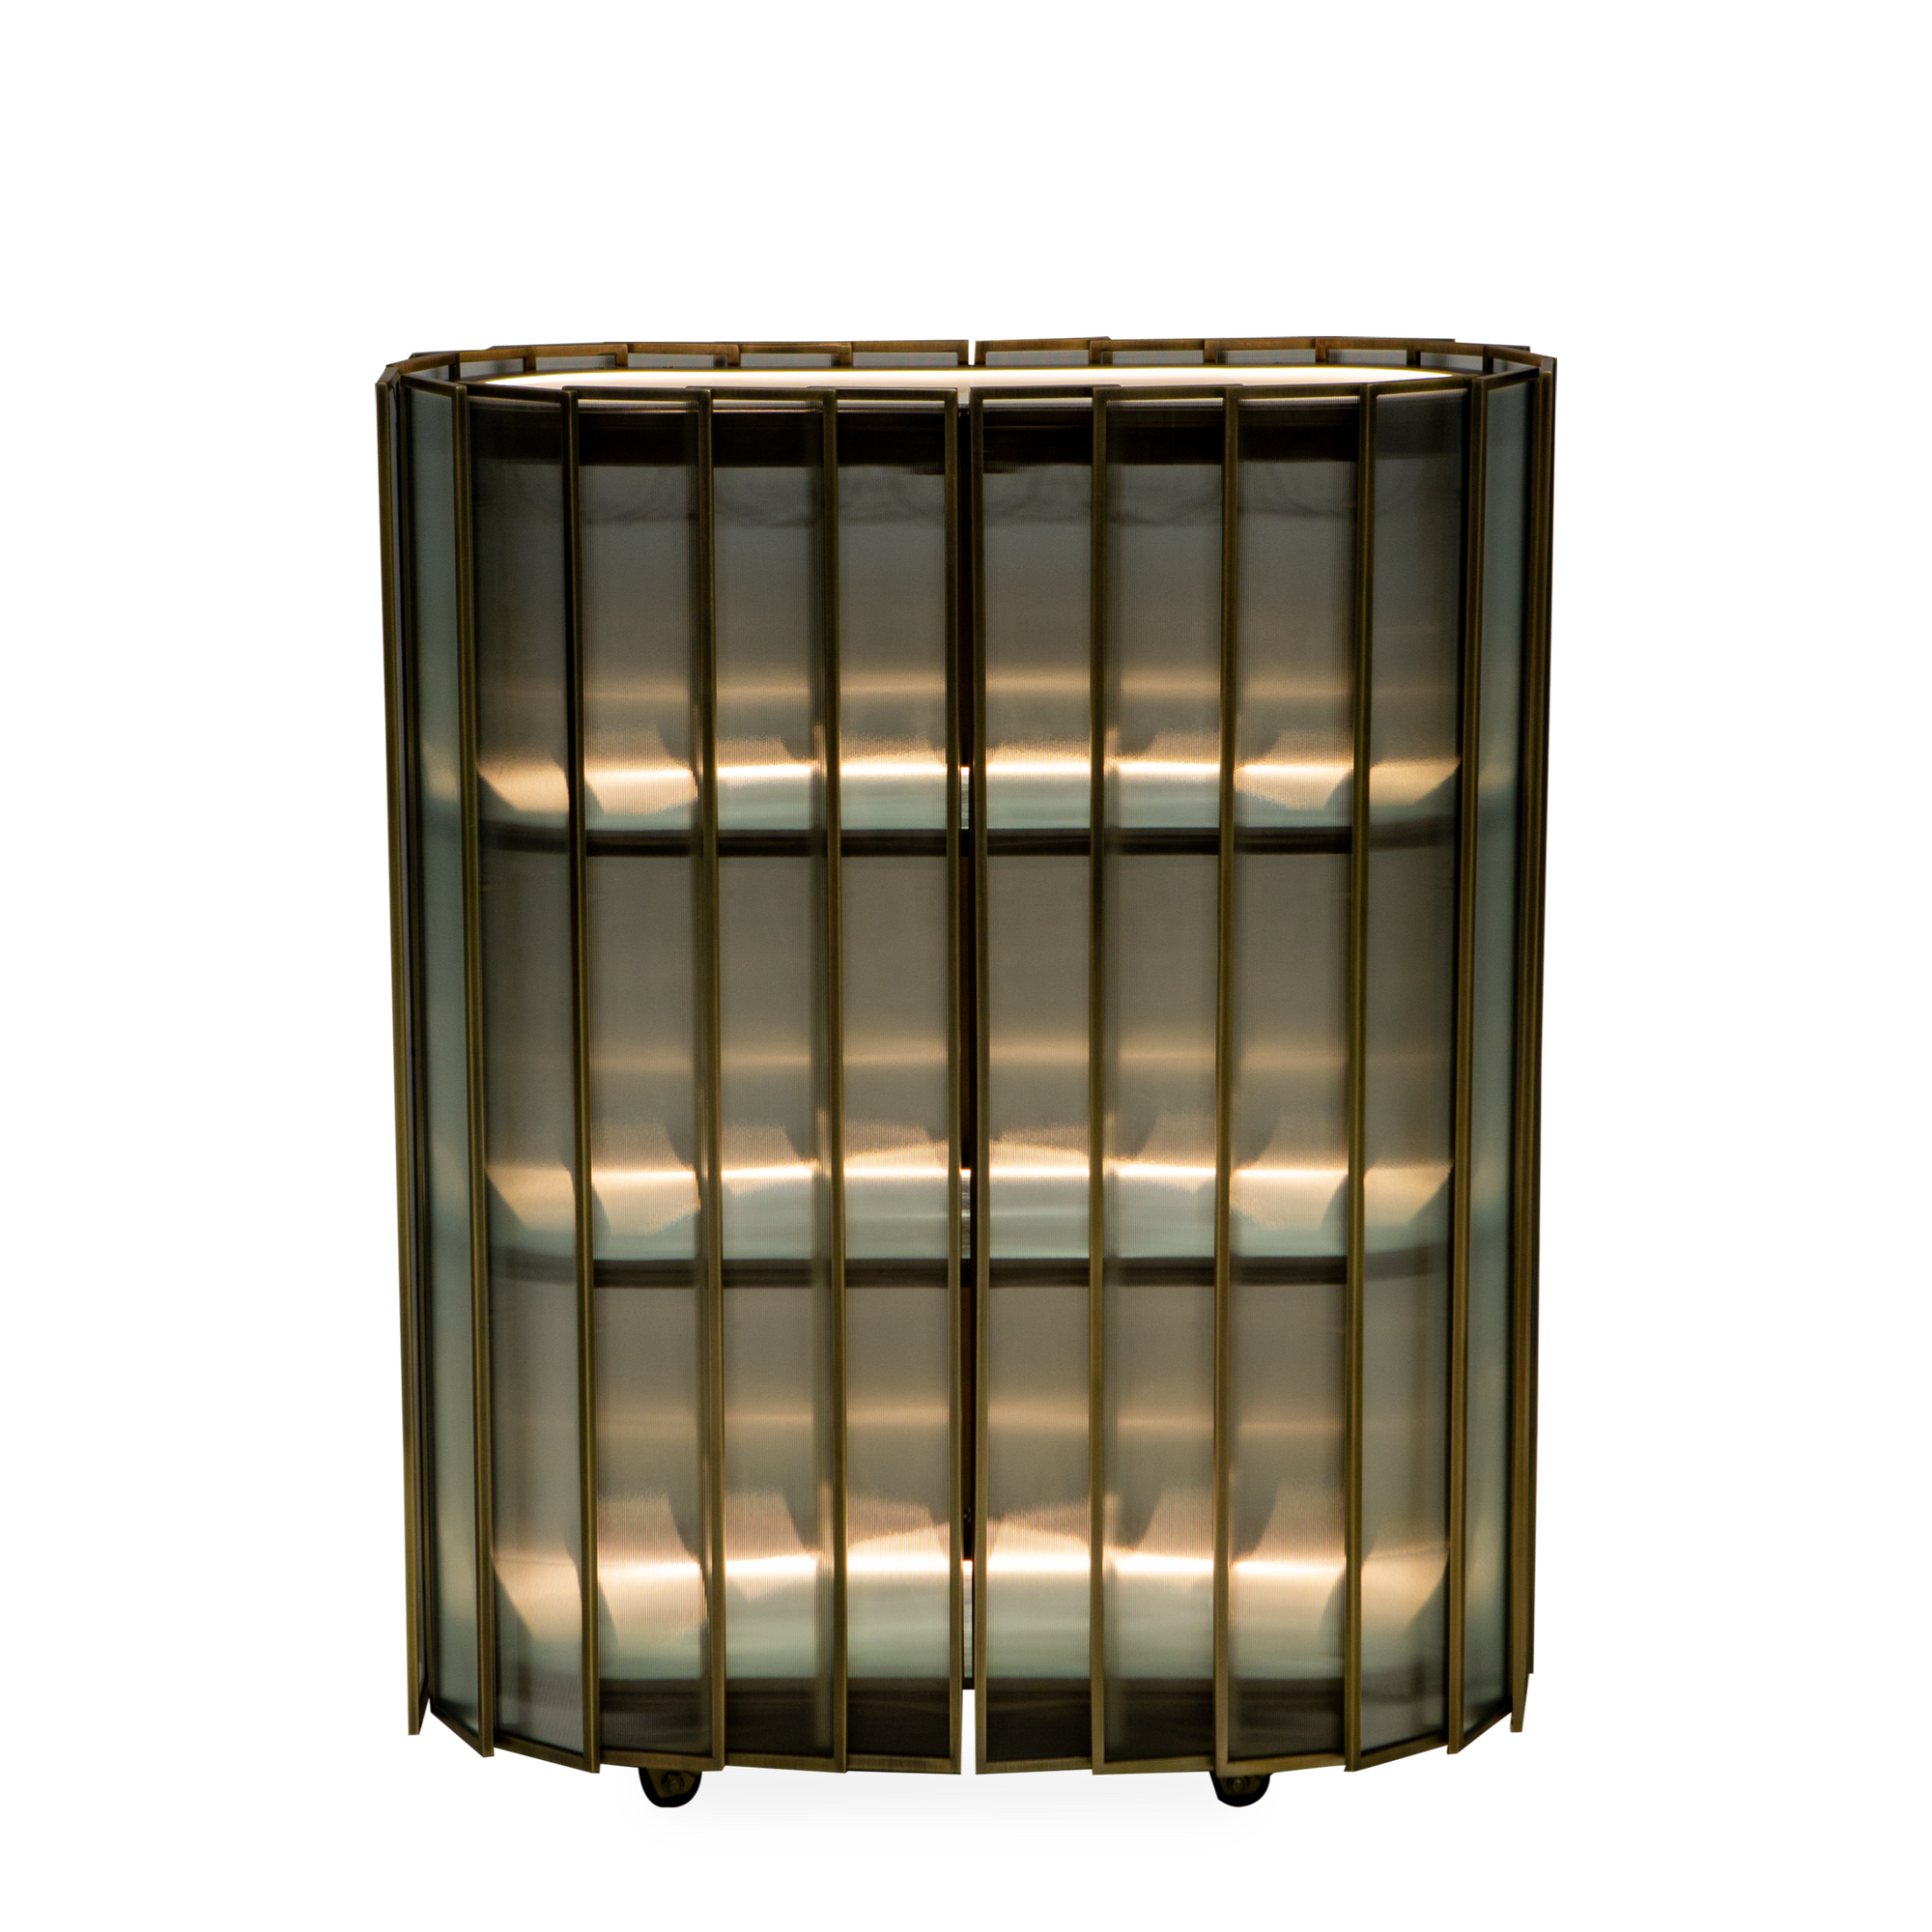 Cocktail hour becomes golden hour with the beautiful Shimmer Bar Cabinet and its mellow golden glow.